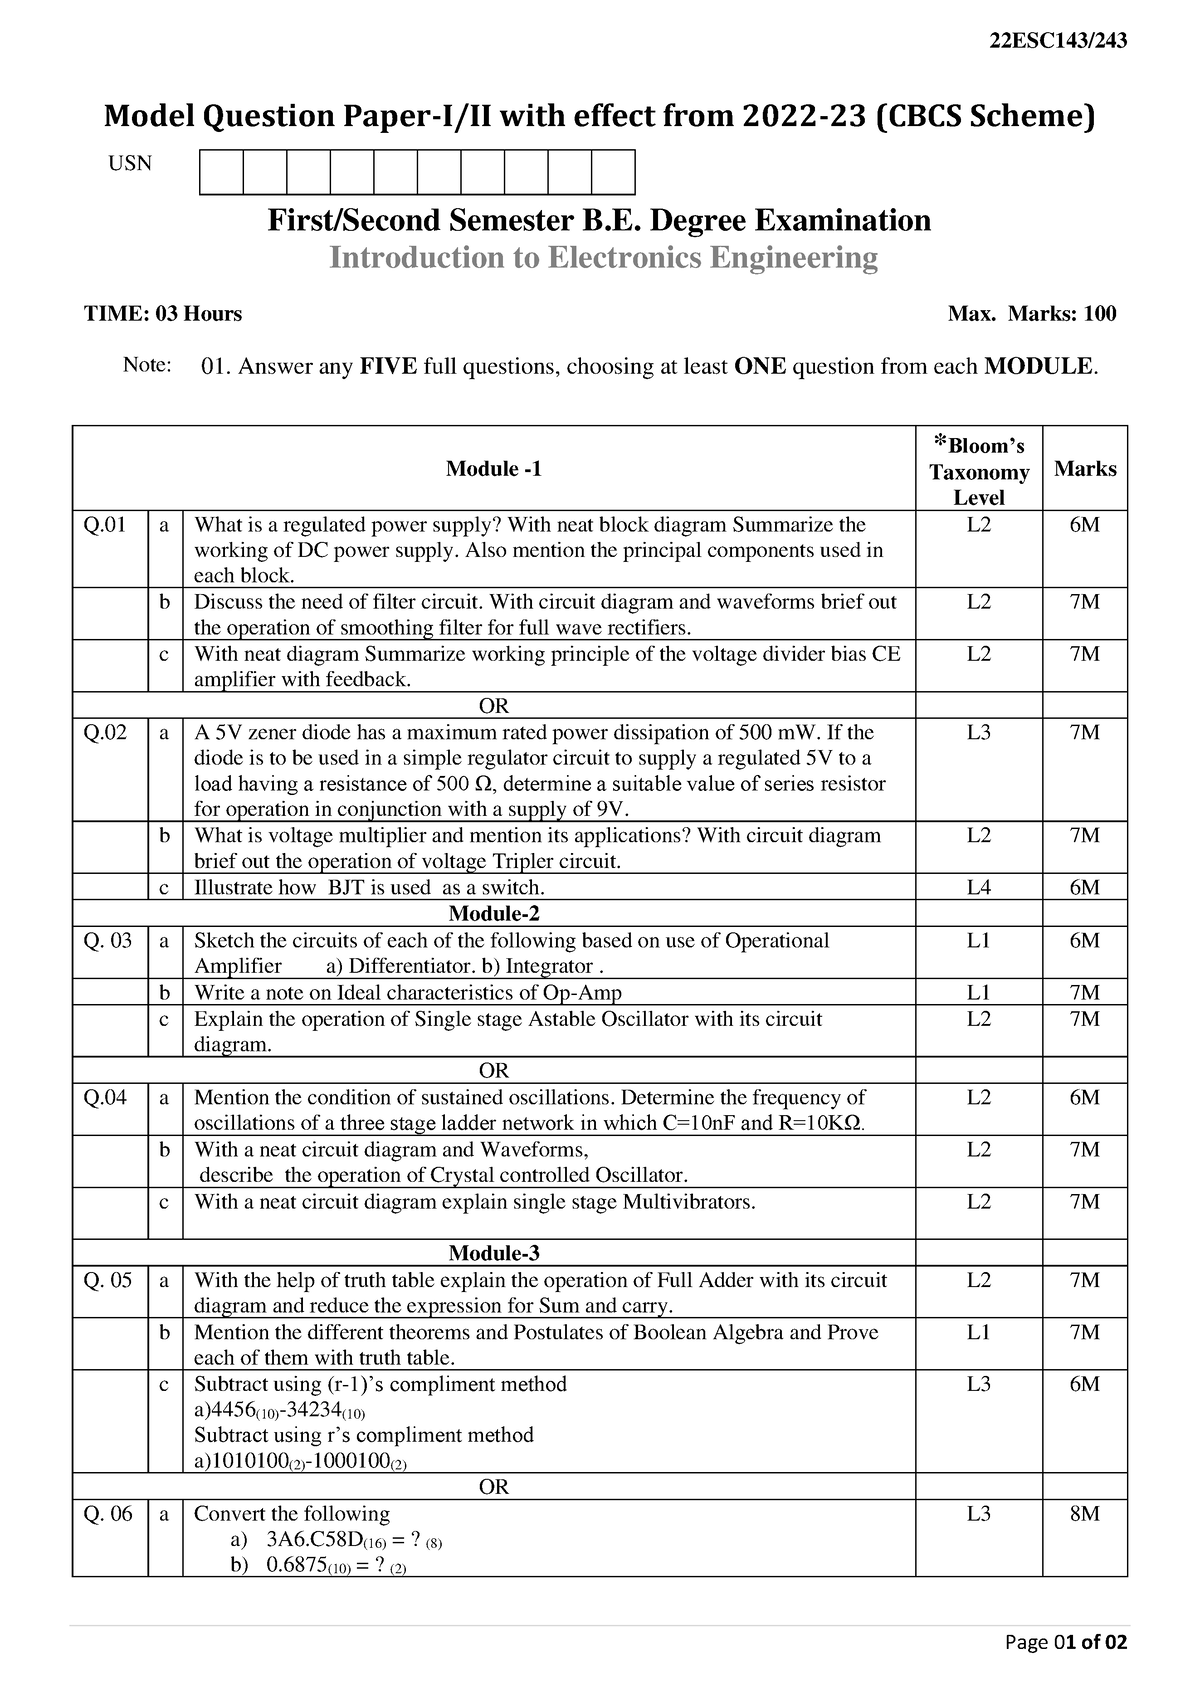 Lecturing notes - 22ESC143/ Page 01 of 02 Model Question Paper-I/II ...